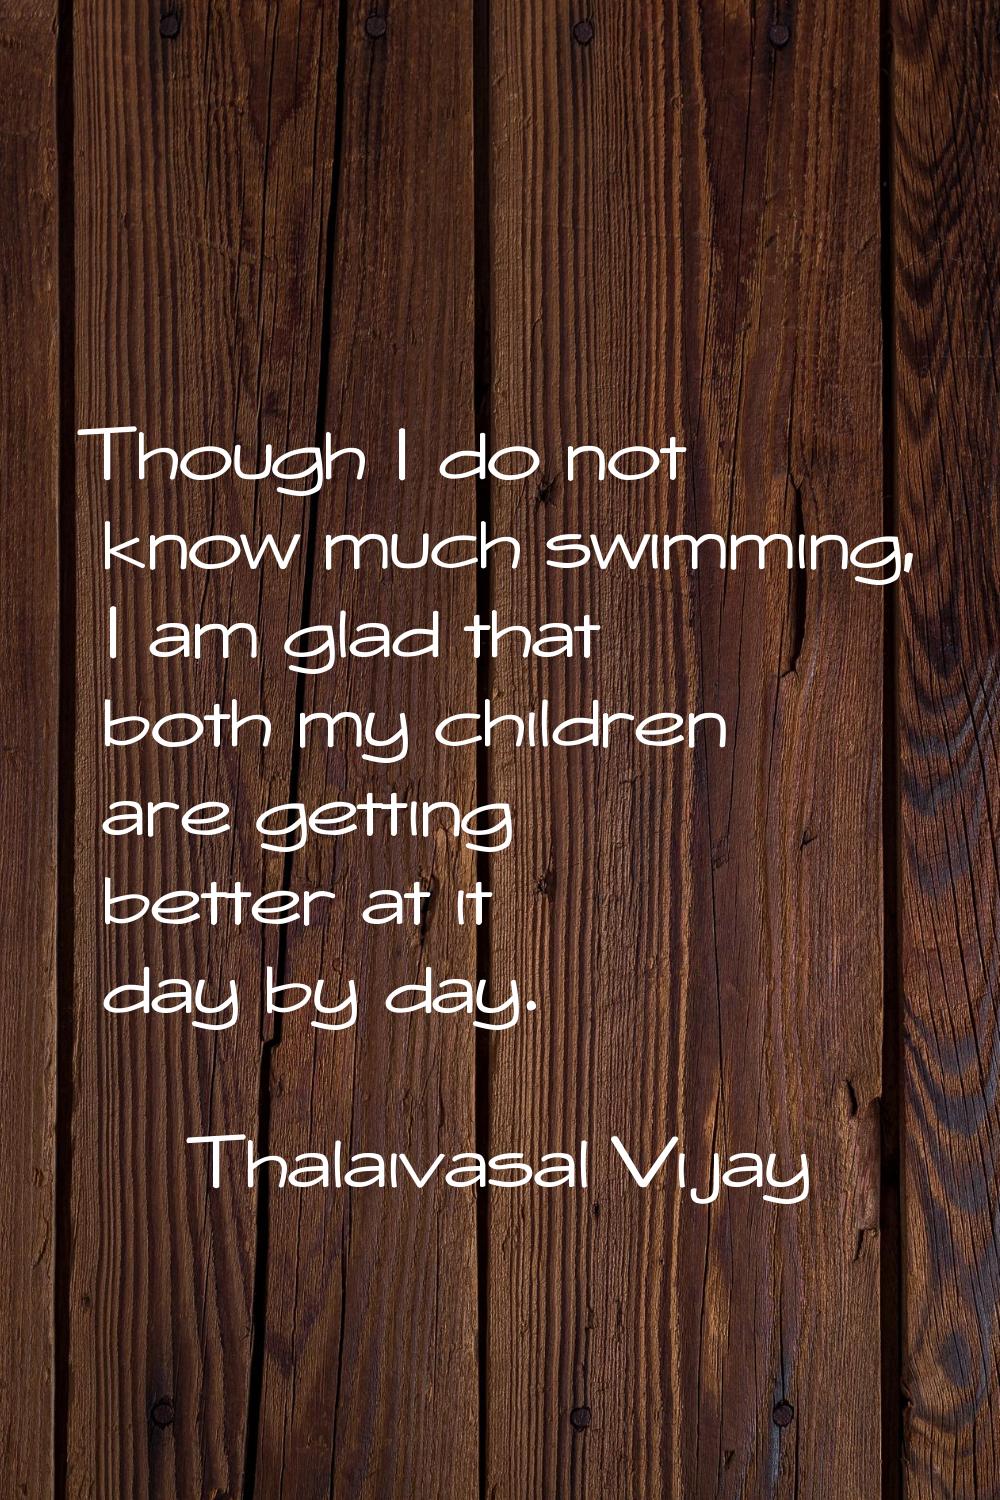 Though I do not know much swimming, I am glad that both my children are getting better at it day by